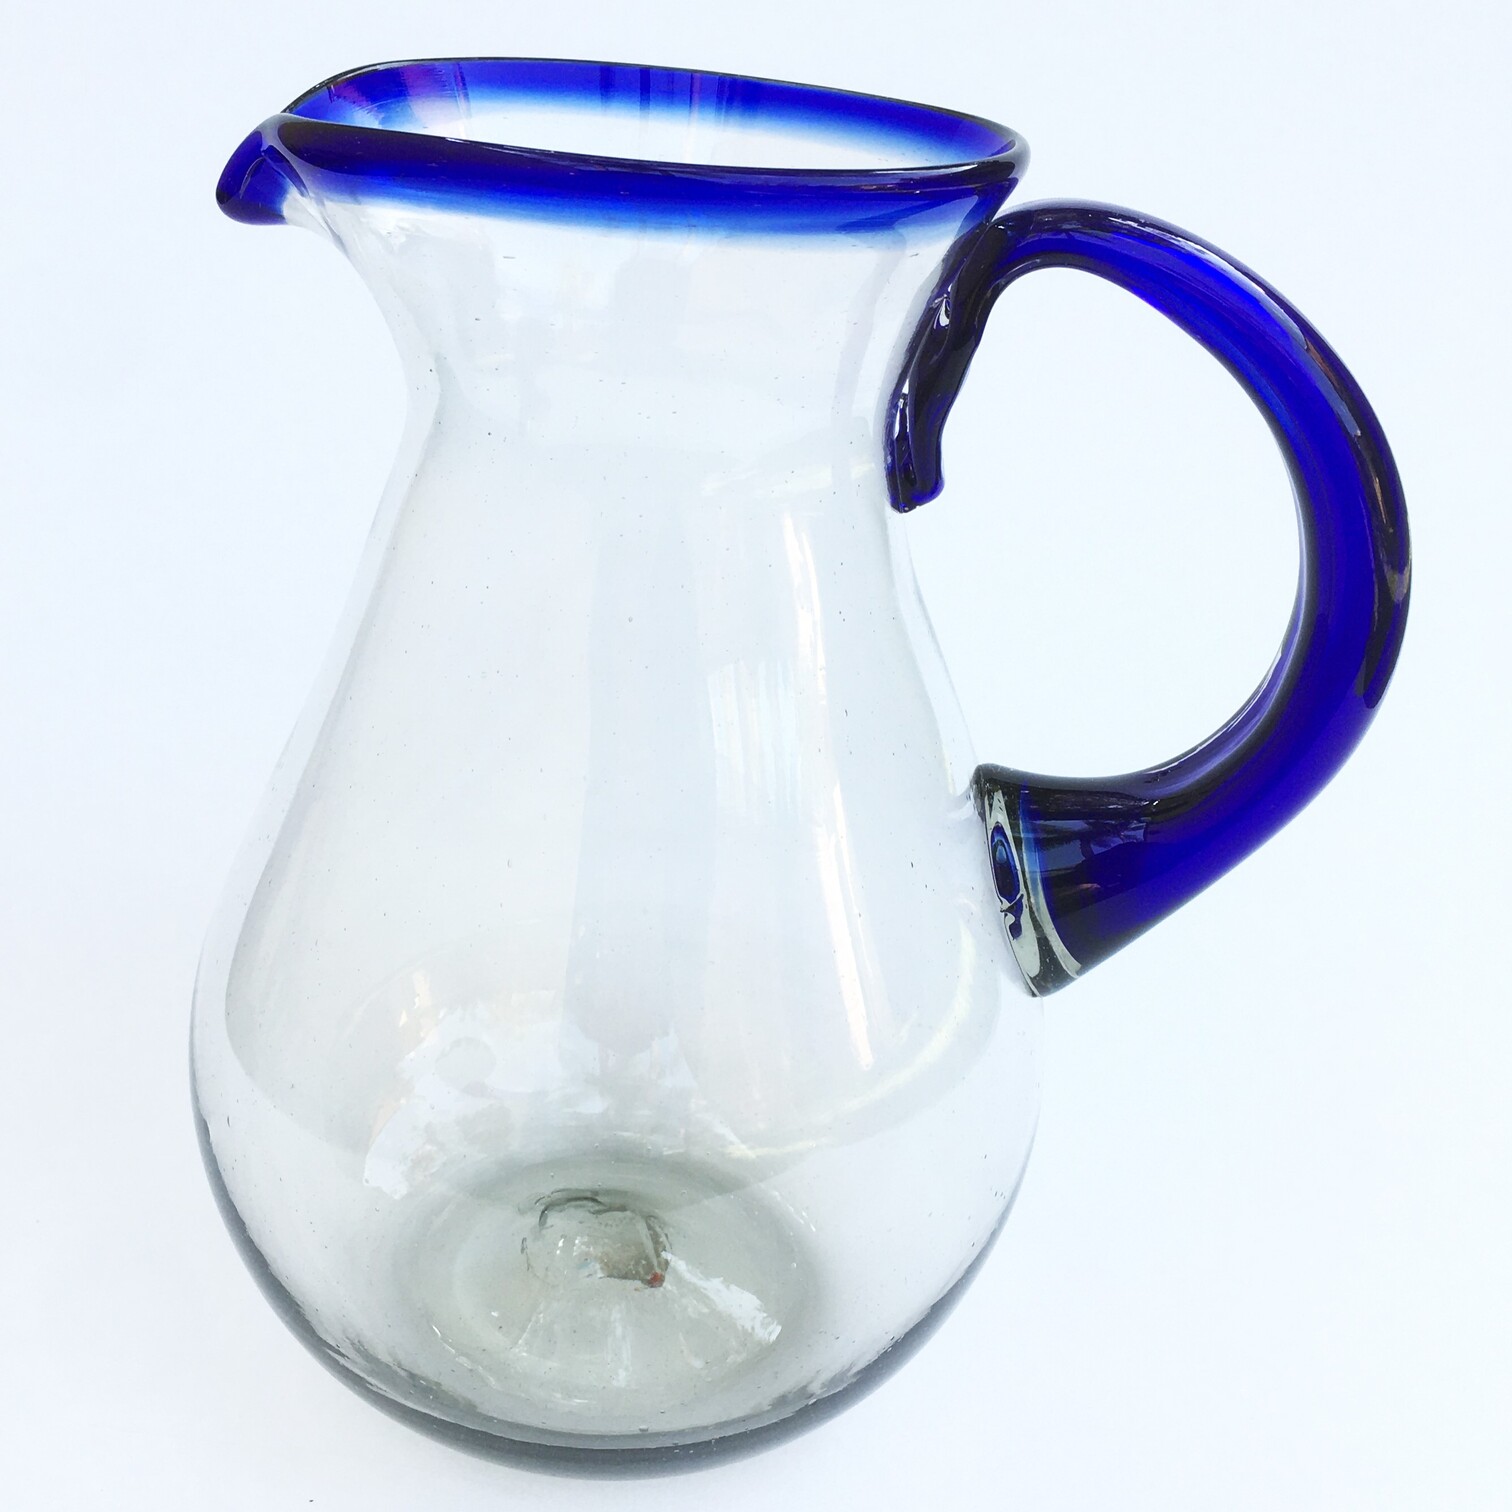 MEXICAN GLASSWARE / Cobalt Blue Rim Tall Pear Pitcher / This classic pitcher is perfect for pouring out all kinds of refreshing drinks.